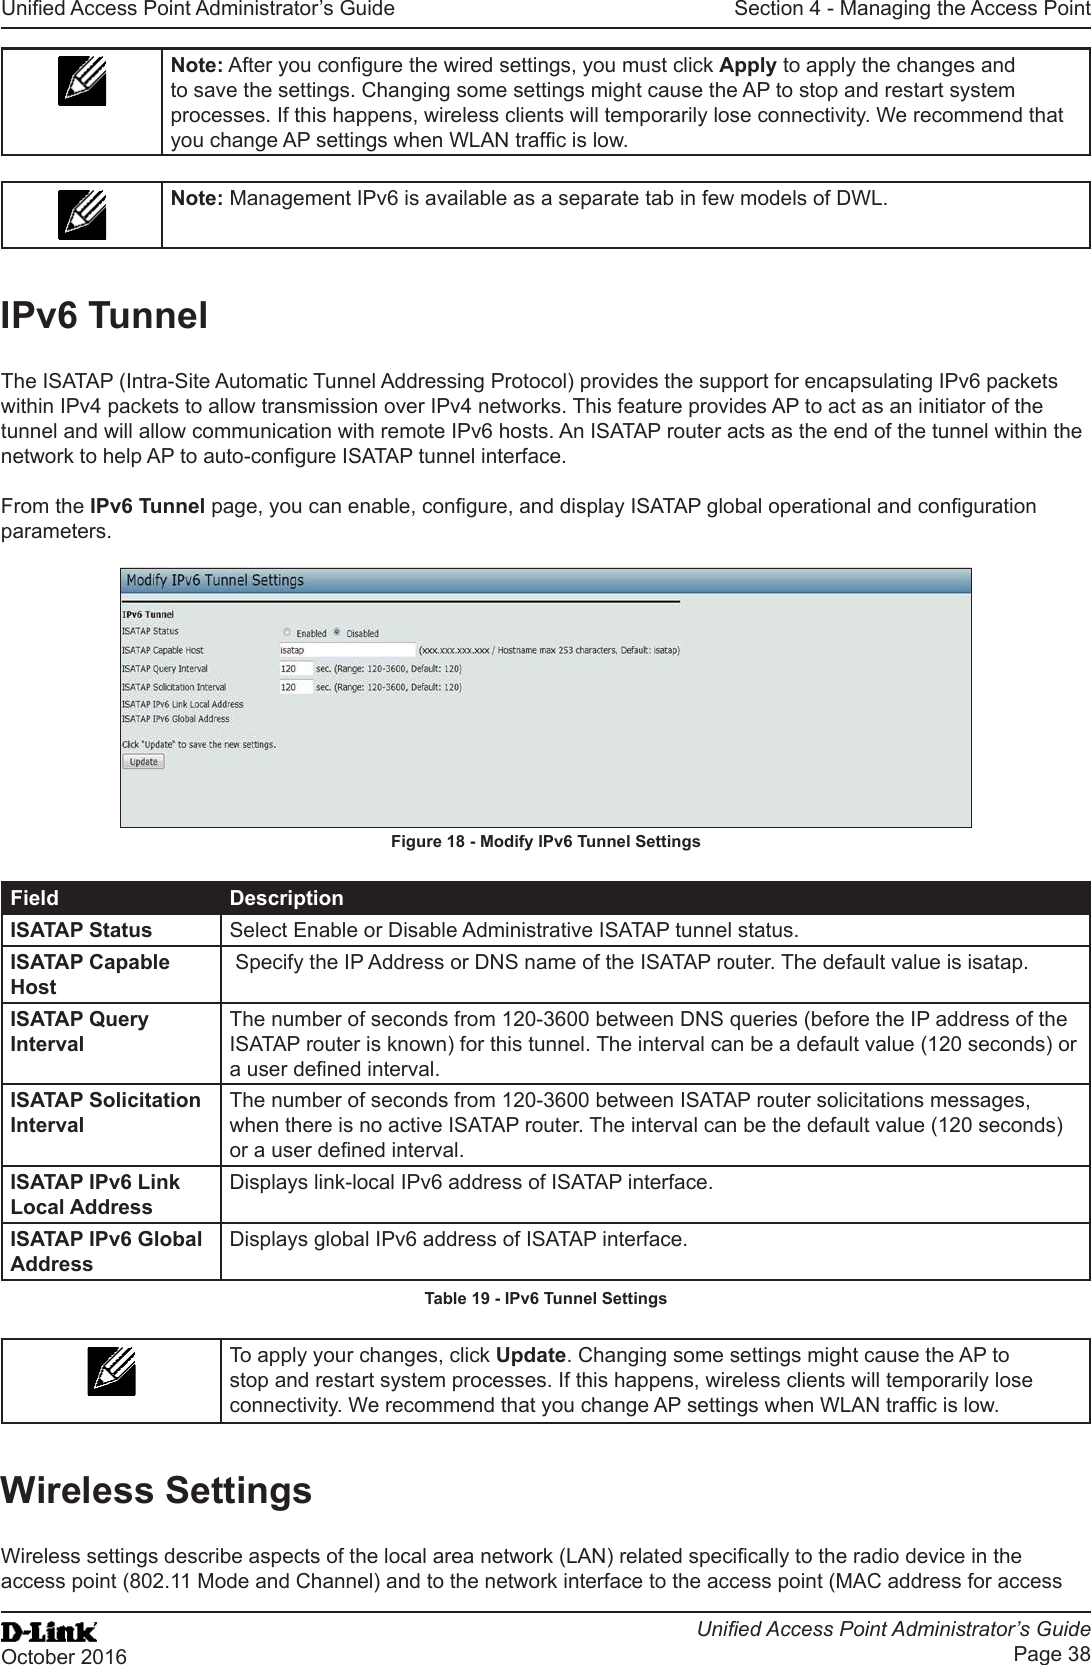 Unied Access Point Administrator’s GuideUnied Access Point Administrator’s GuidePage 38October 2016Section 4 - Managing the Access PointNote: After you congure the wired settings, you must click Apply to apply the changes and to save the settings. Changing some settings might cause the AP to stop and restart system processes. If this happens, wireless clients will temporarily lose connectivity. We recommend that you change AP settings when WLAN trafc is low. Note: Management IPv6 is available as a separate tab in few models of DWL.IPv6 TunnelThe ISATAP (Intra-Site Automatic Tunnel Addressing Protocol) provides the support for encapsulating IPv6 packets within IPv4 packets to allow transmission over IPv4 networks. This feature provides AP to act as an initiator of the tunnel and will allow communication with remote IPv6 hosts. An ISATAP router acts as the end of the tunnel within the network to help AP to auto-congure ISATAP tunnel interface.From the IPv6 Tunnel page, you can enable, congure, and display ISATAP global operational and conguration parameters. Figure 18 - Modify IPv6 Tunnel SettingsField DescriptionISATAP Status Select Enable or Disable Administrative ISATAP tunnel status.ISATAP Capable Host Specify the IP Address or DNS name of the ISATAP router. The default value is isatap.ISATAP Query IntervalThe number of seconds from 120-3600 between DNS queries (before the IP address of the ISATAP router is known) for this tunnel. The interval can be a default value (120 seconds) or a user dened interval.ISATAP Solicitation IntervalThe number of seconds from 120-3600 between ISATAP router solicitations messages, when there is no active ISATAP router. The interval can be the default value (120 seconds) or a user dened interval.ISATAP IPv6 Link Local AddressDisplays link-local IPv6 address of ISATAP interface.ISATAP IPv6 Global AddressDisplays global IPv6 address of ISATAP interface.Table 19 - IPv6 Tunnel SettingsTo apply your changes, click Update. Changing some settings might cause the AP to stop and restart system processes. If this happens, wireless clients will temporarily lose connectivity. We recommend that you change AP settings when WLAN trafc is low.Wireless SettingsWireless settings describe aspects of the local area network (LAN) related specically to the radio device in the access point (802.11 Mode and Channel) and to the network interface to the access point (MAC address for access 